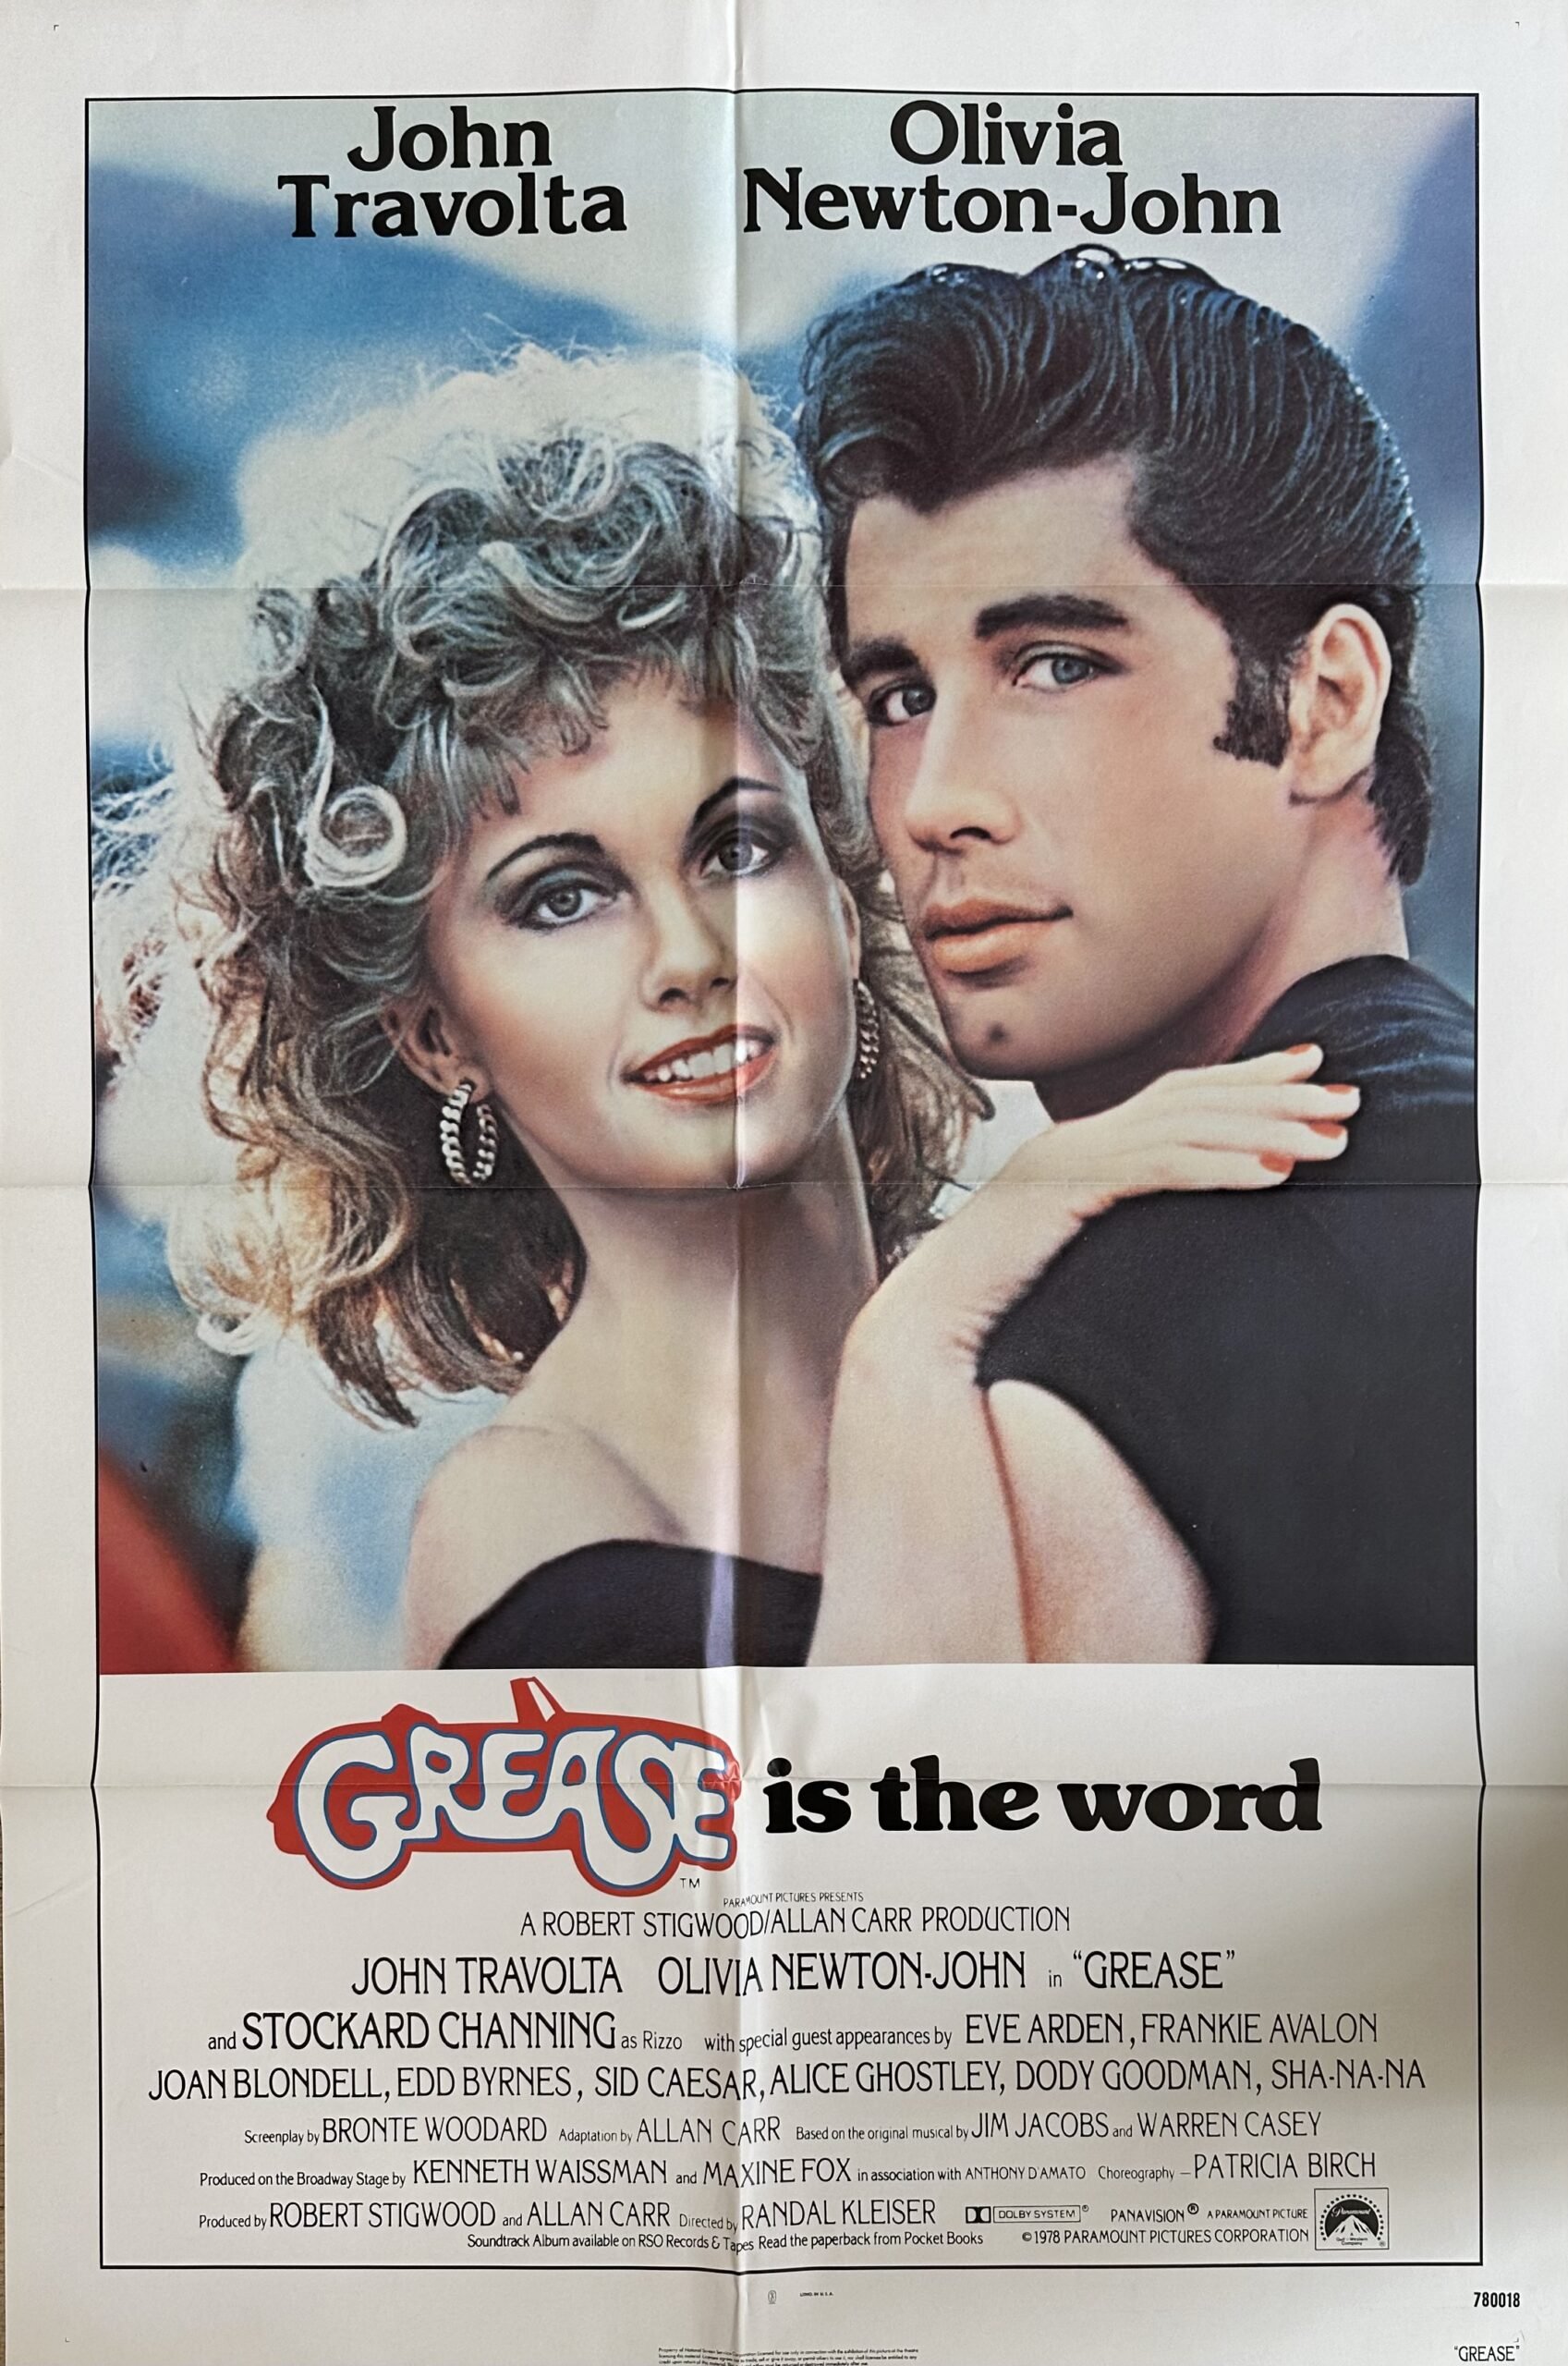 Original vintage US movie poster for the comedy musical, Grease